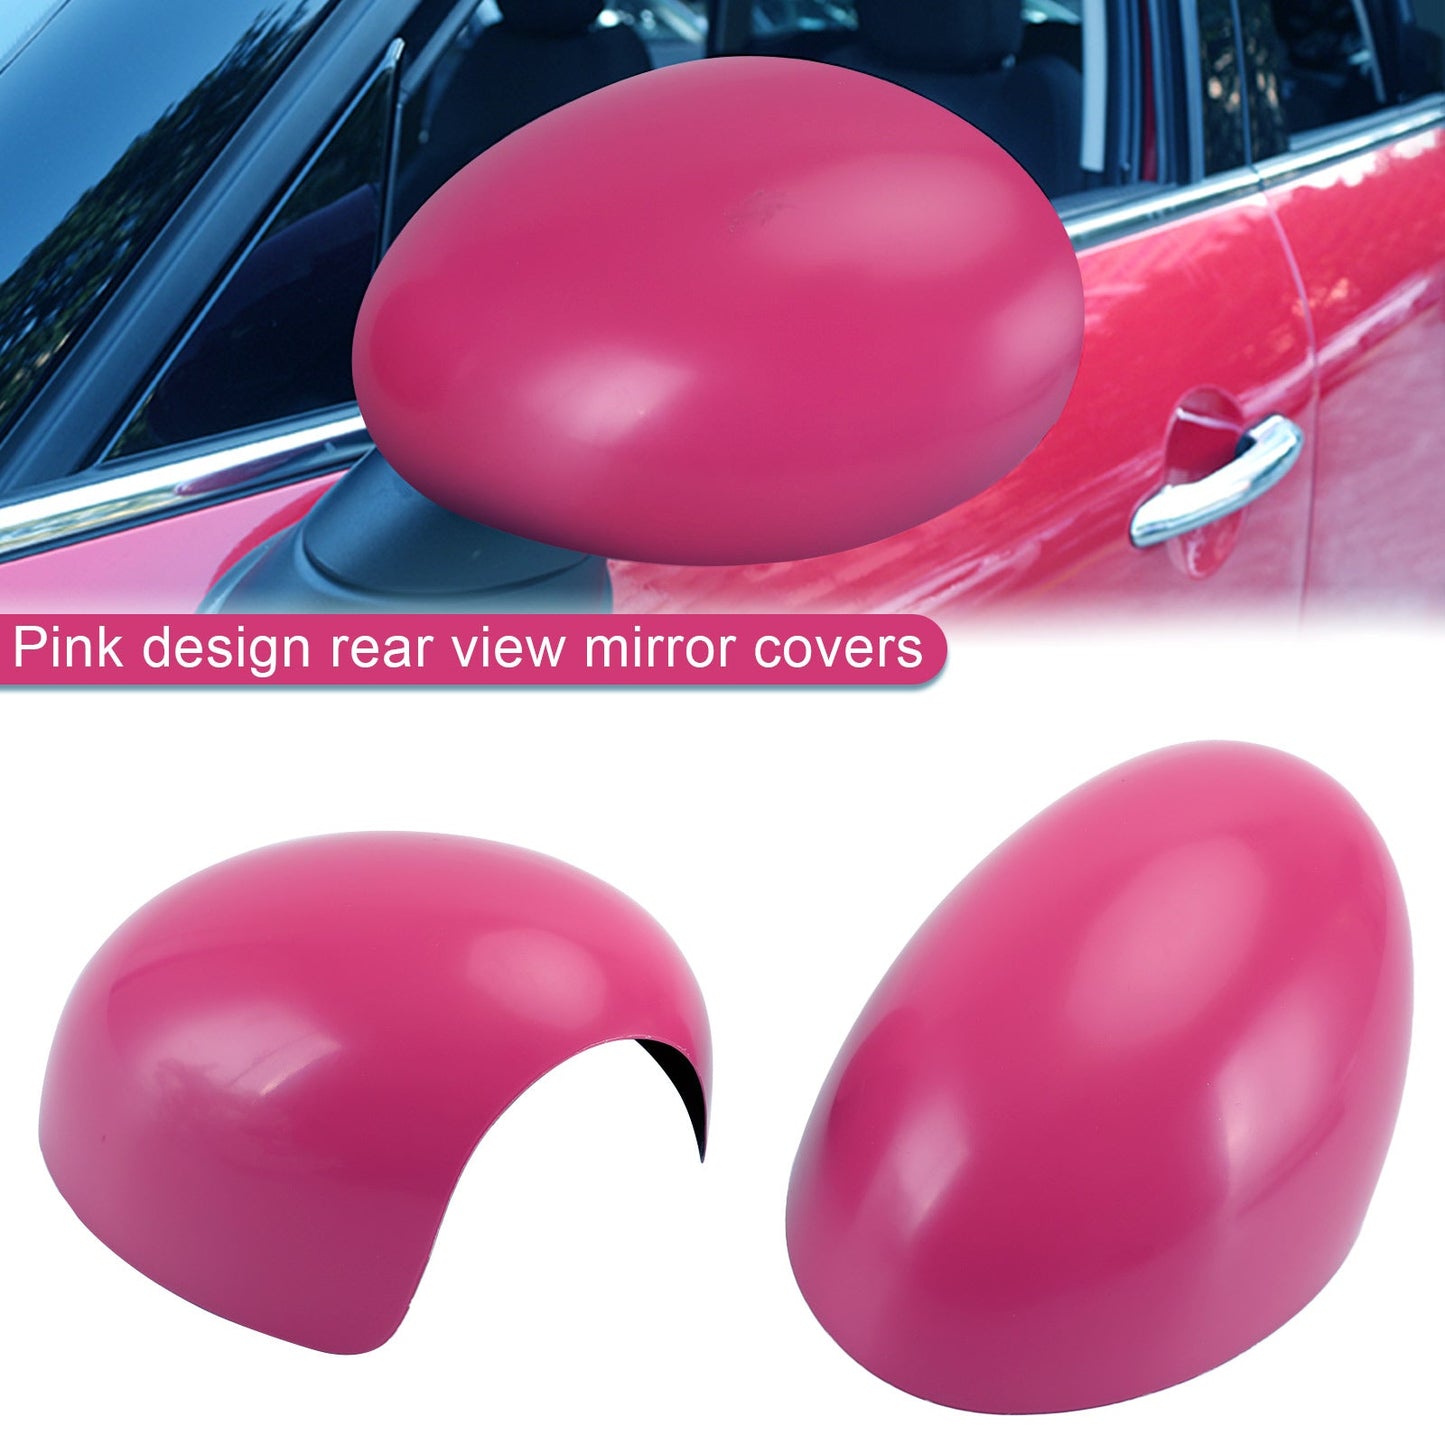 2 x Pink Mirror Covers for MINI Cooper R55 R56 R57 High Quality